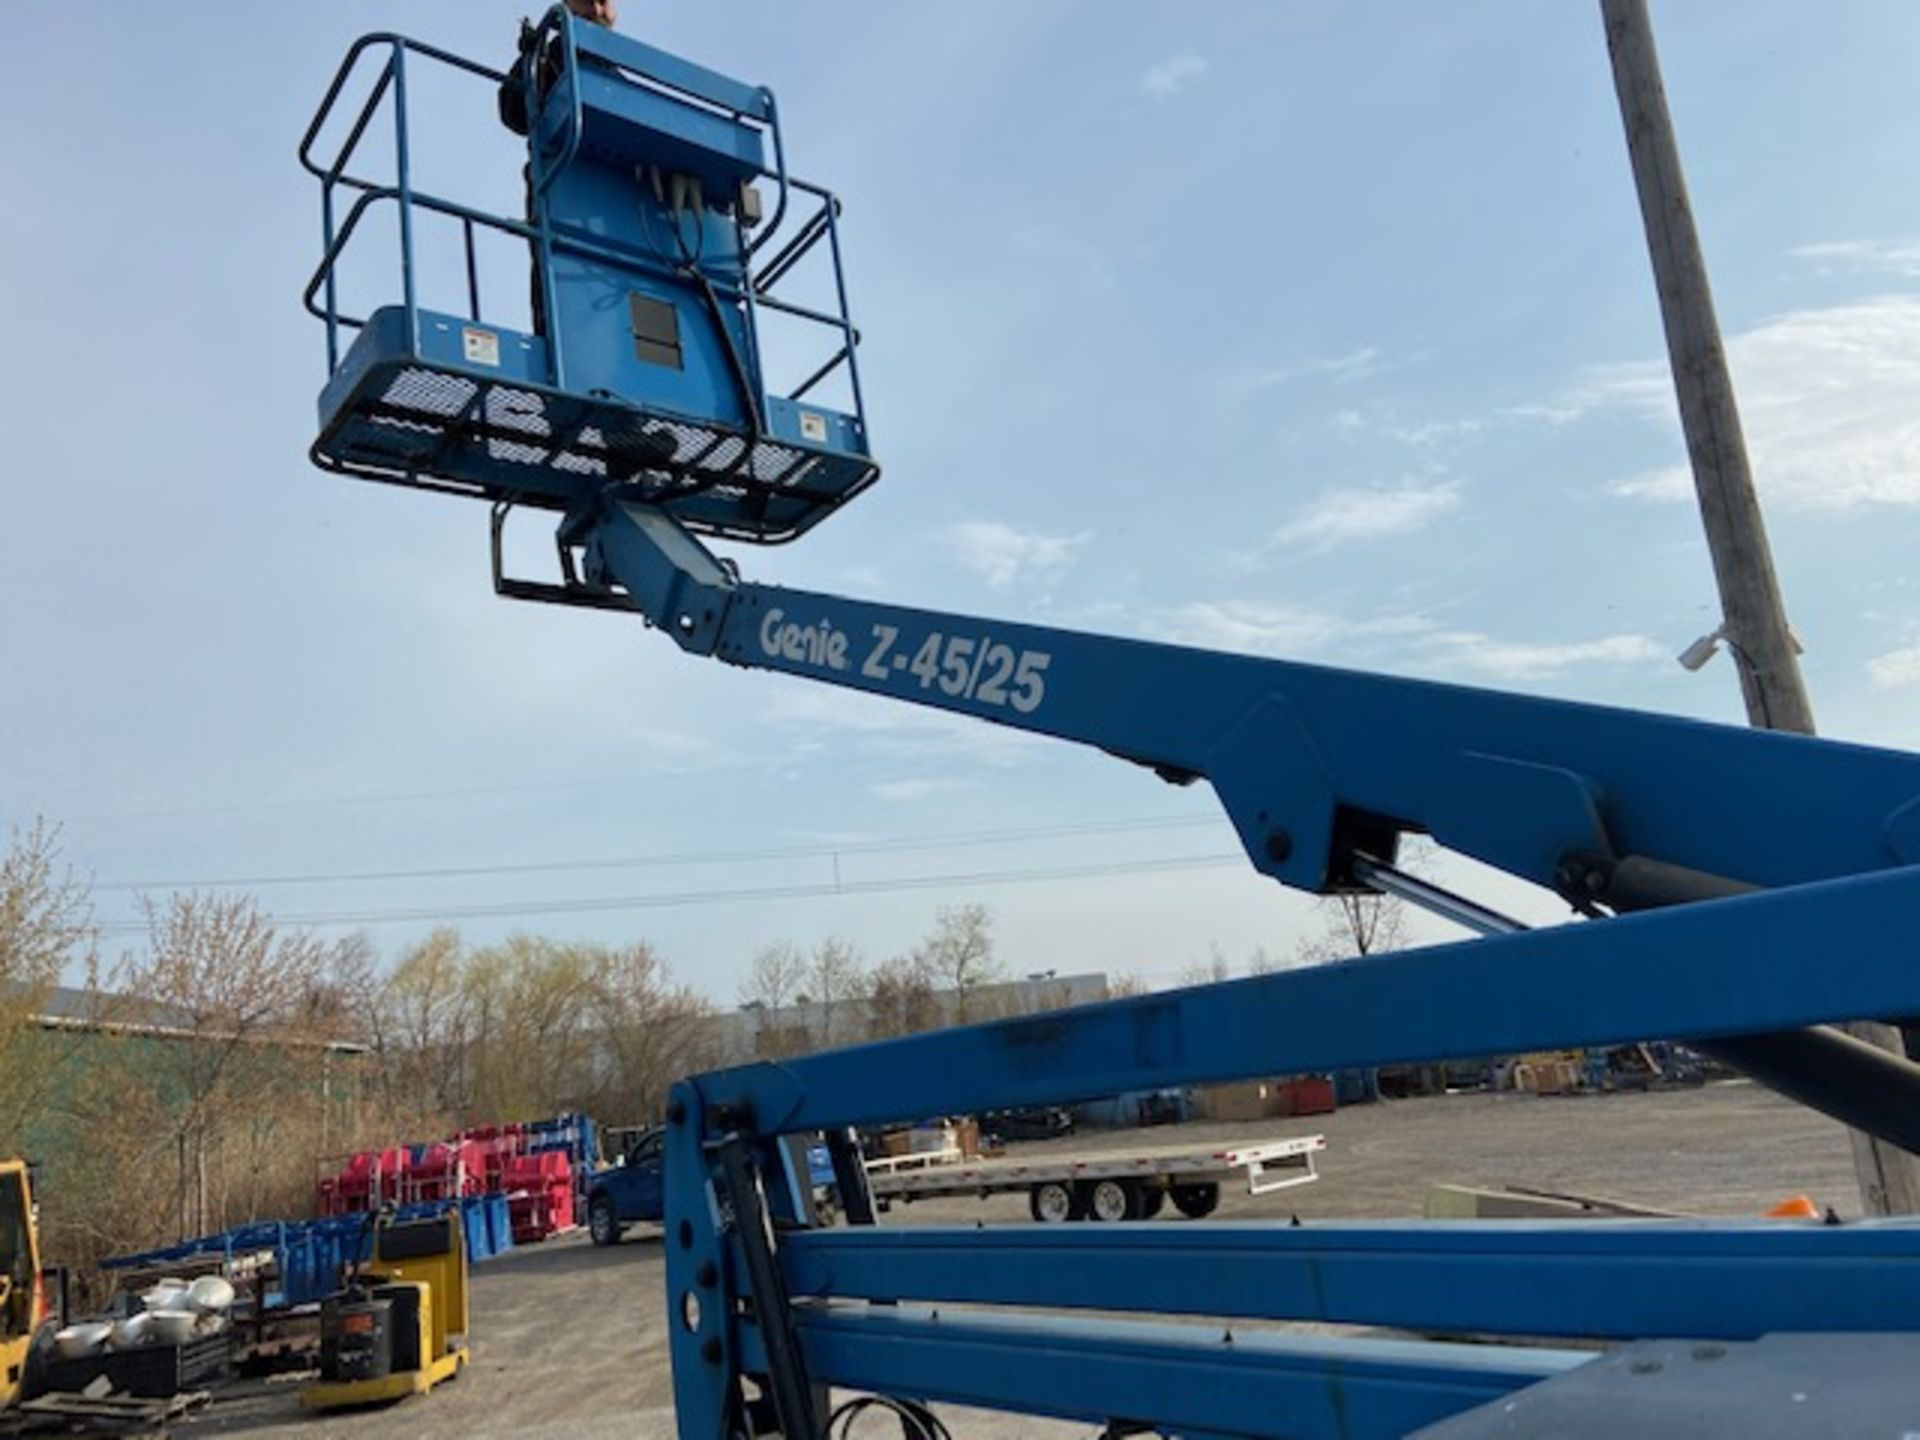 FREE CUSTOMS - MINT 2006 Genie Zoom Boom Articulating Lift model Z-45/25 45' height Electric LOW - Image 2 of 4